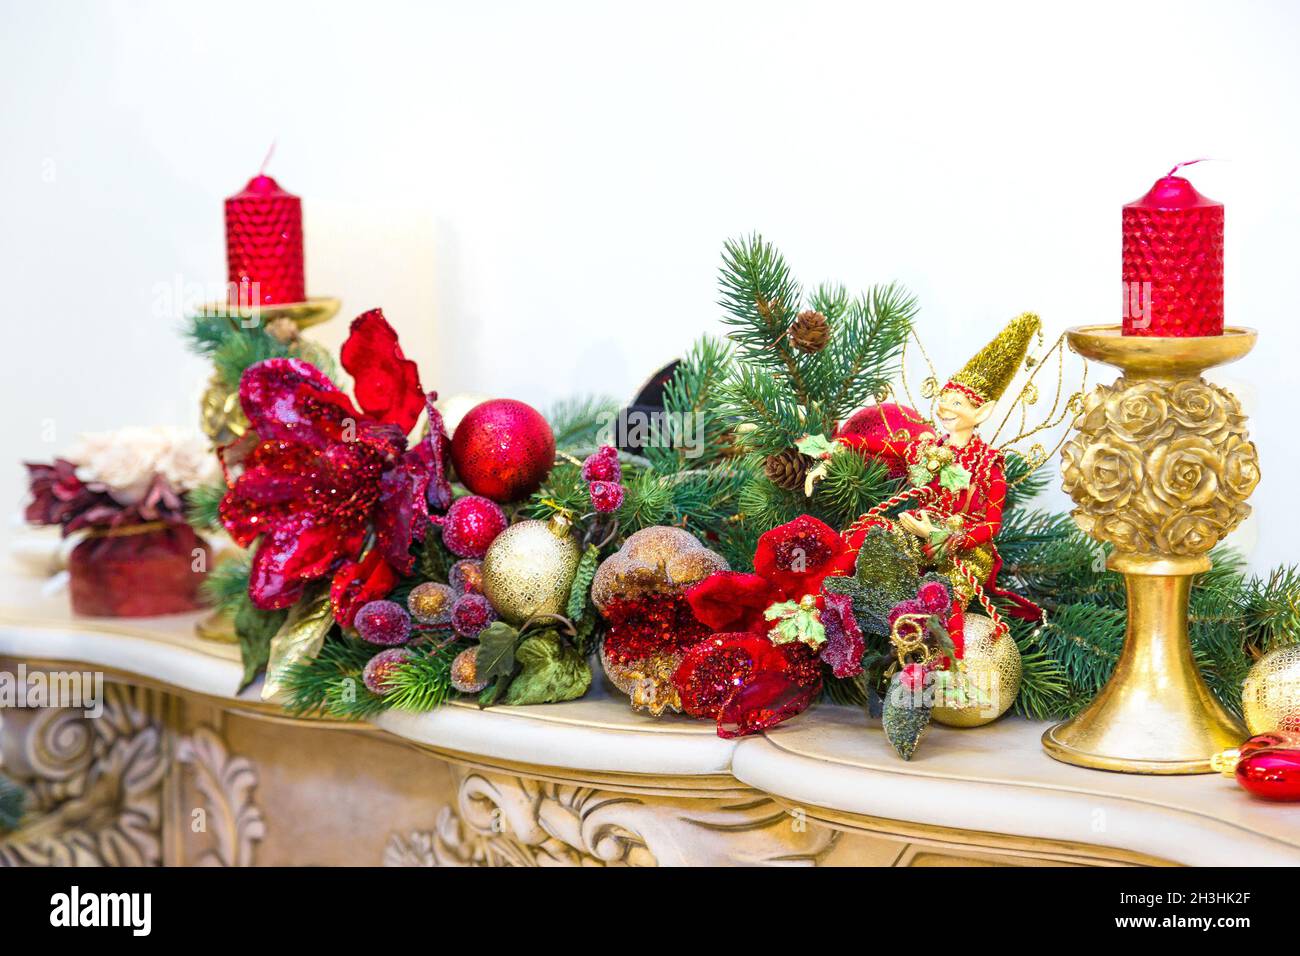 A fireplace mantle is decorated for Christmas with garland, lights, a bow and other decorations. Stock Photo